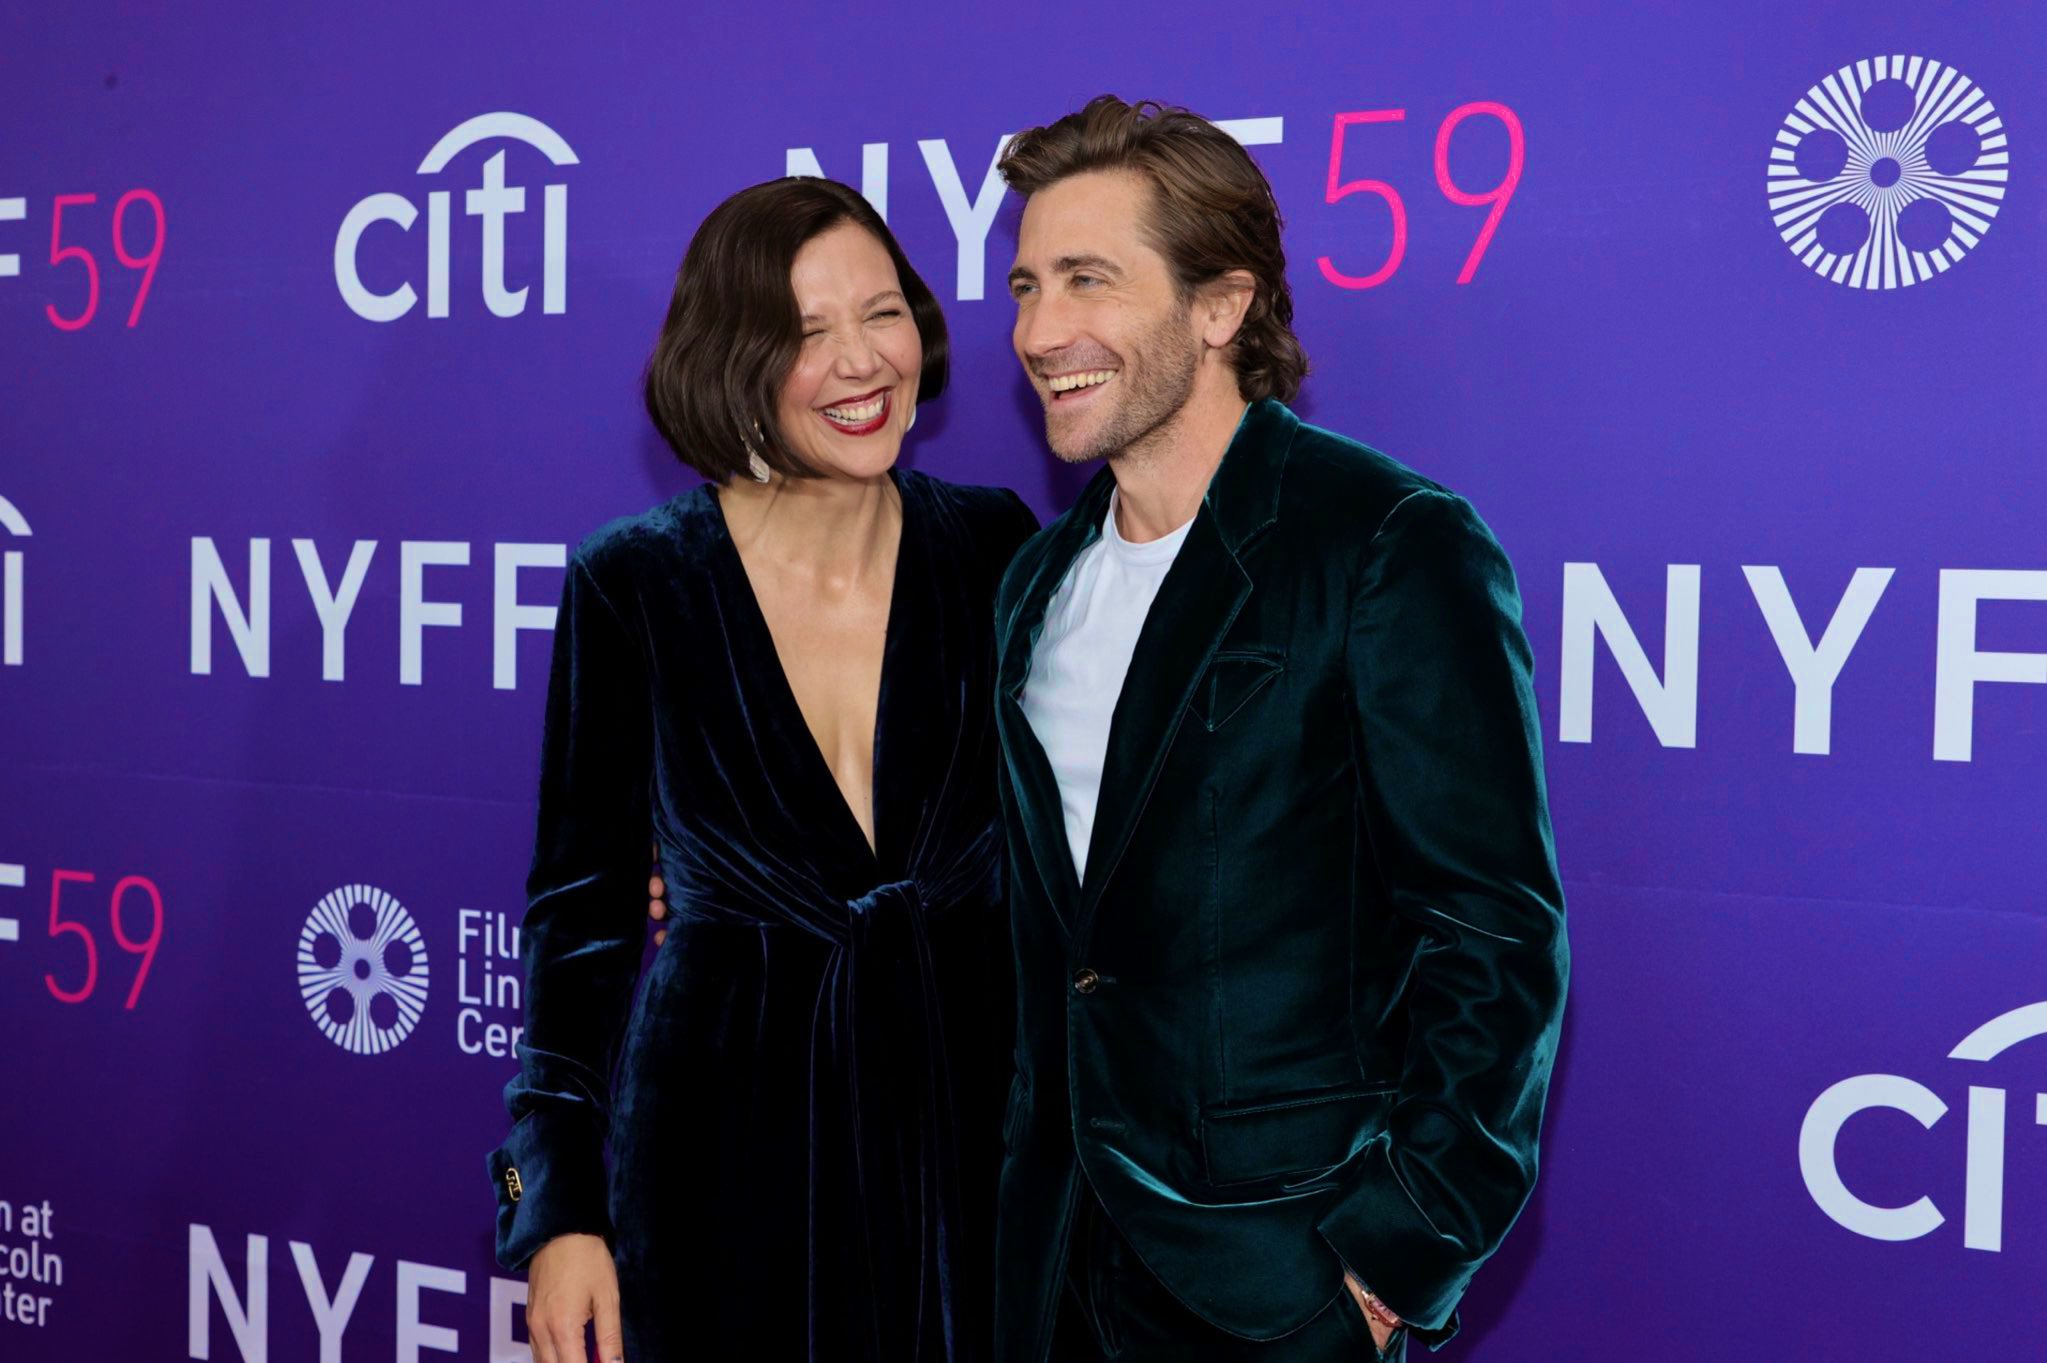 Maggie Gyllenhaal’s net worth is less than her brother, Jake Gyllenhaal.